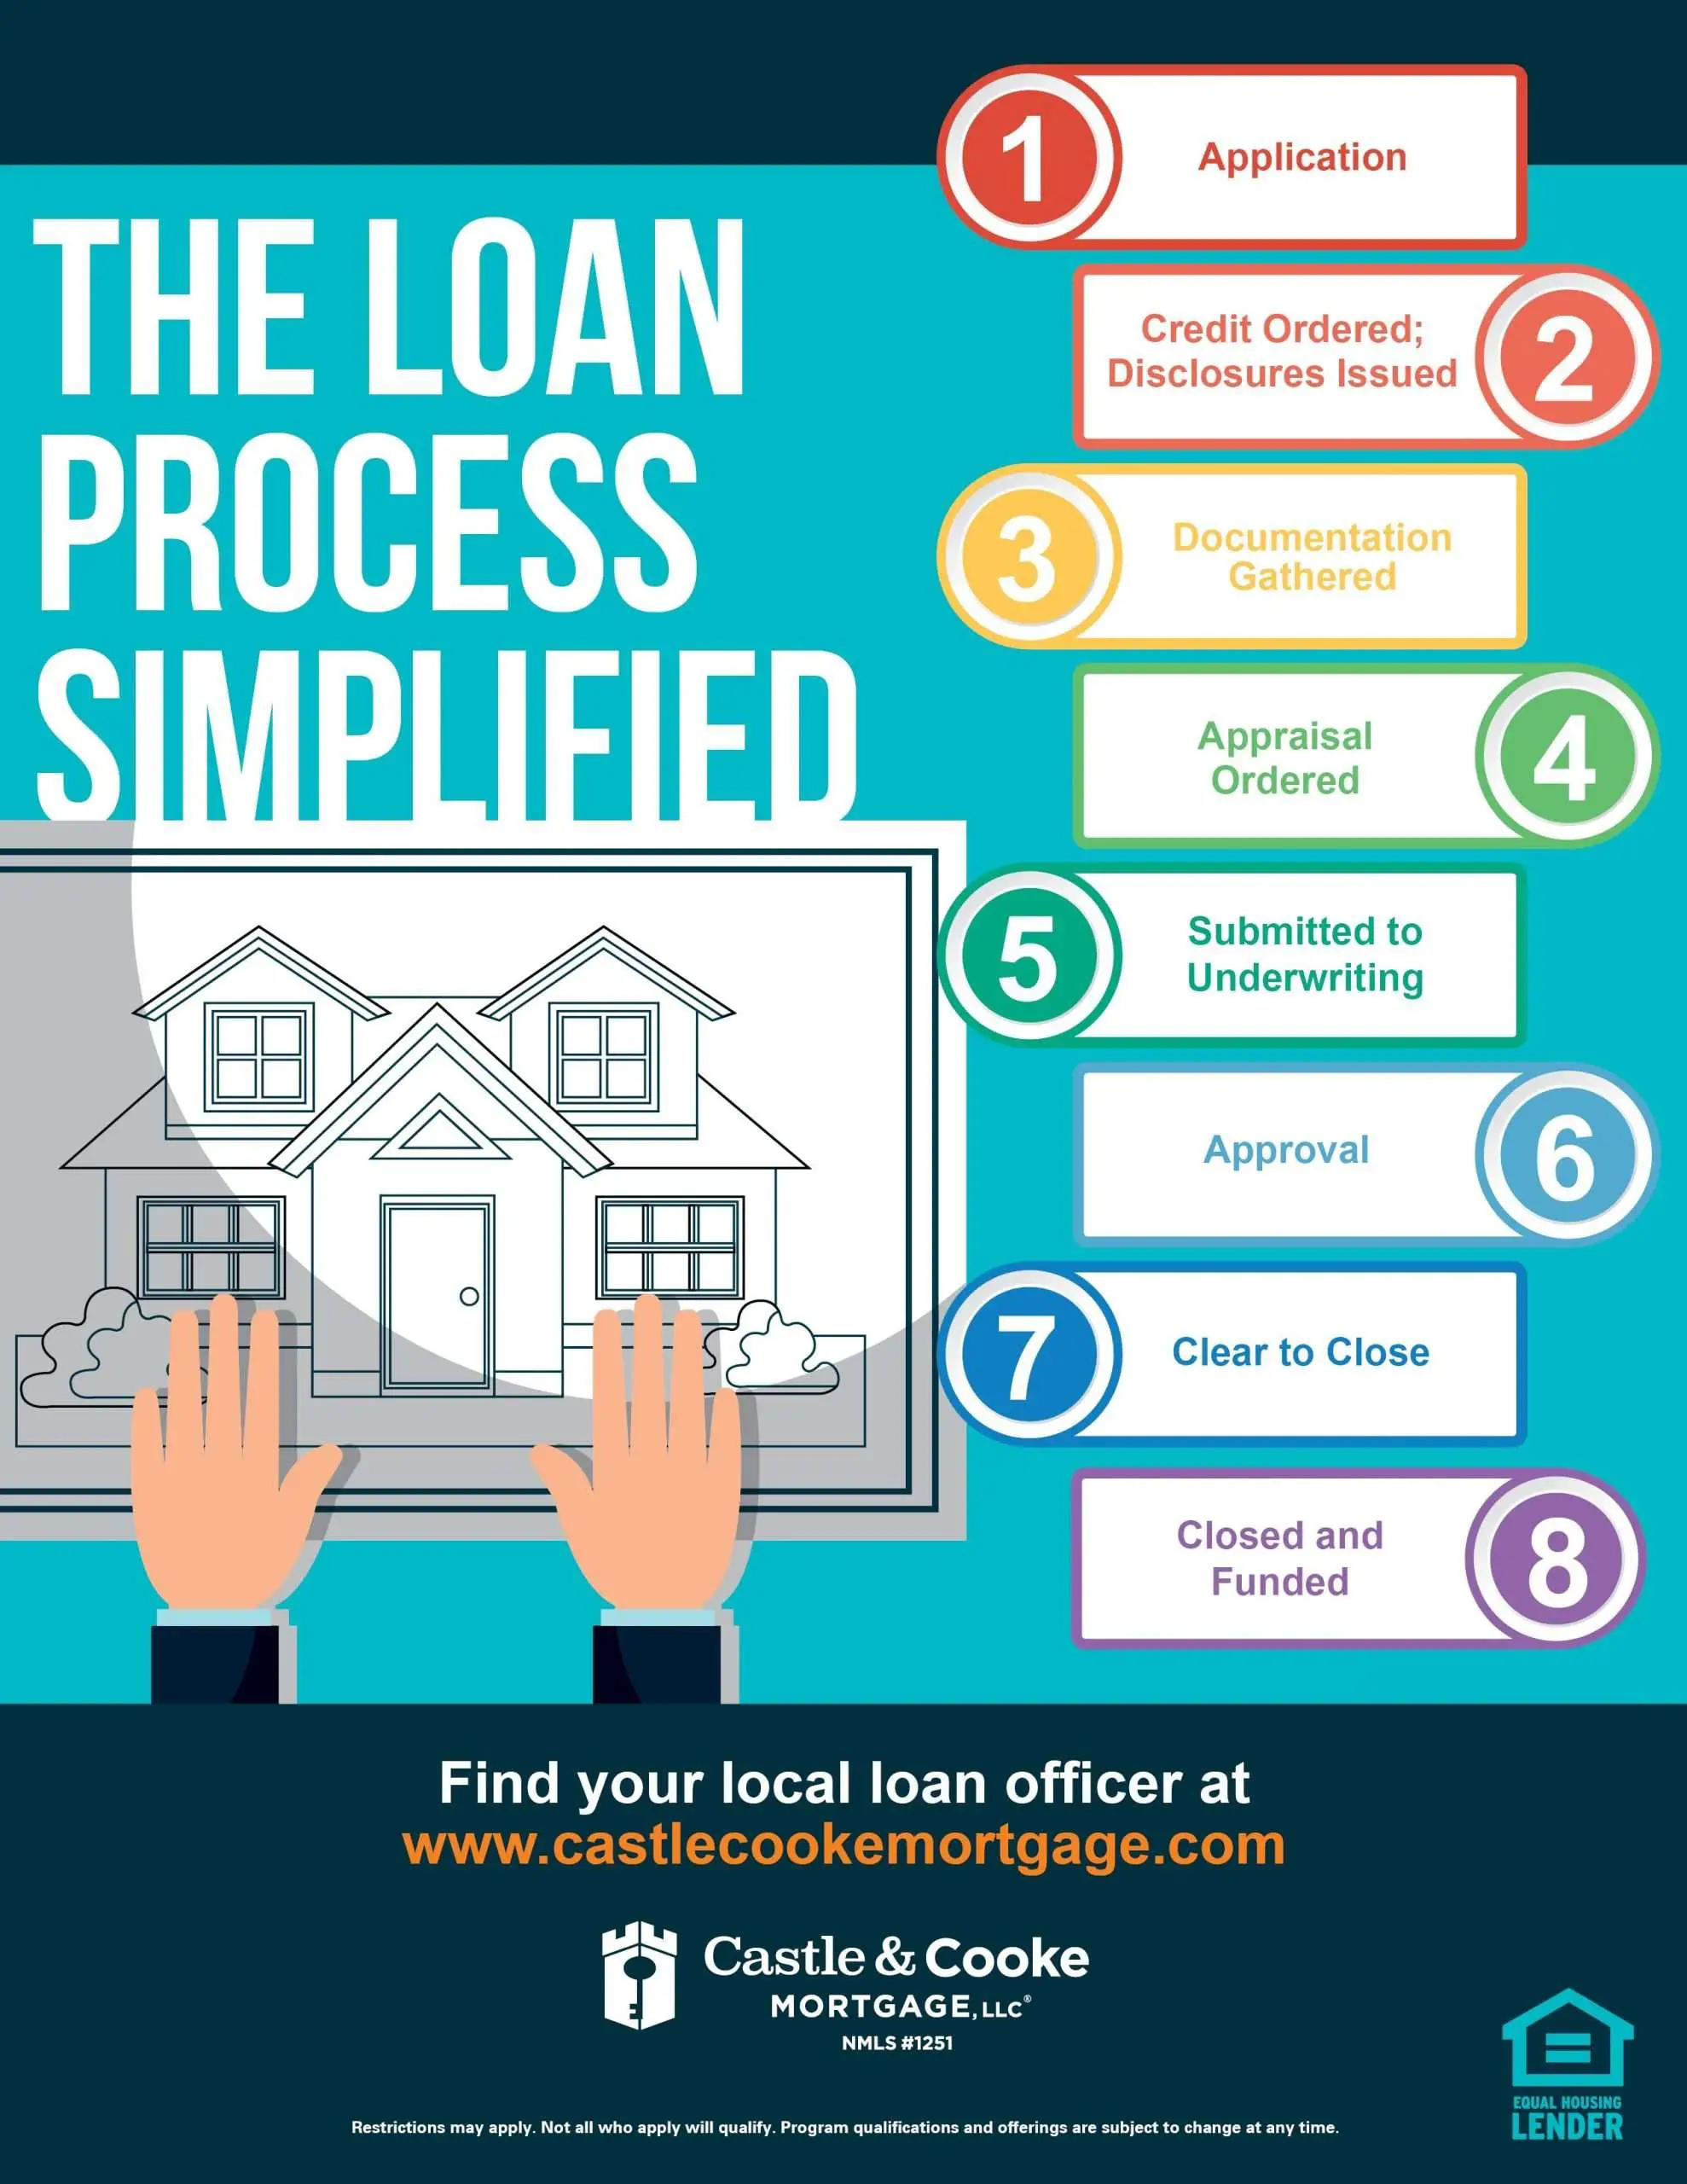 [Infographic] The Loan Process Simplified